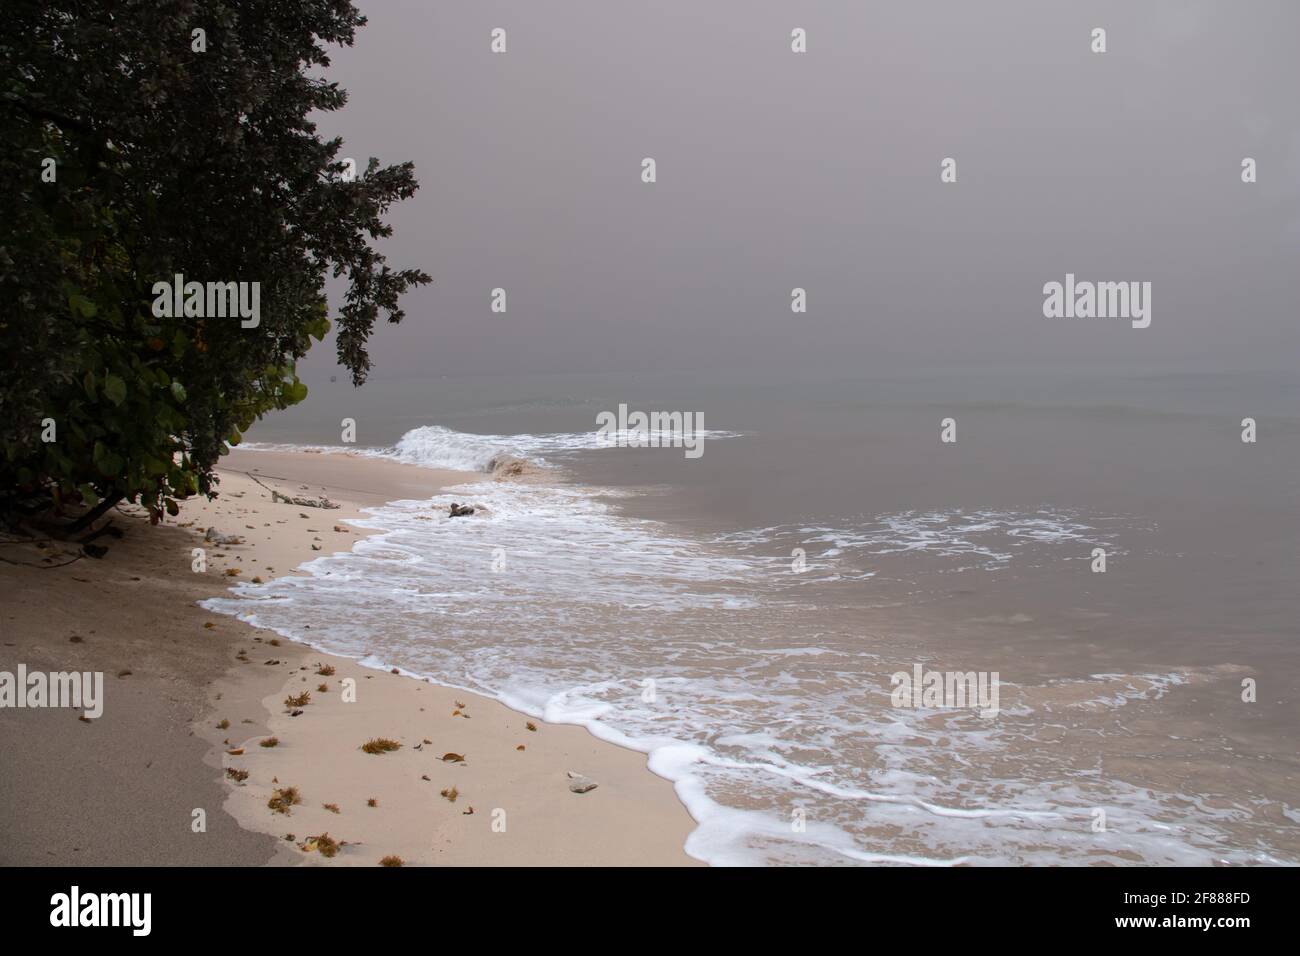 St. James, Barbados - April 10 2021: Thick ash from St. Vincent and Grenadine's Soufriere volcano eruption turns the sky and ocean grey in Barbados. Stock Photo